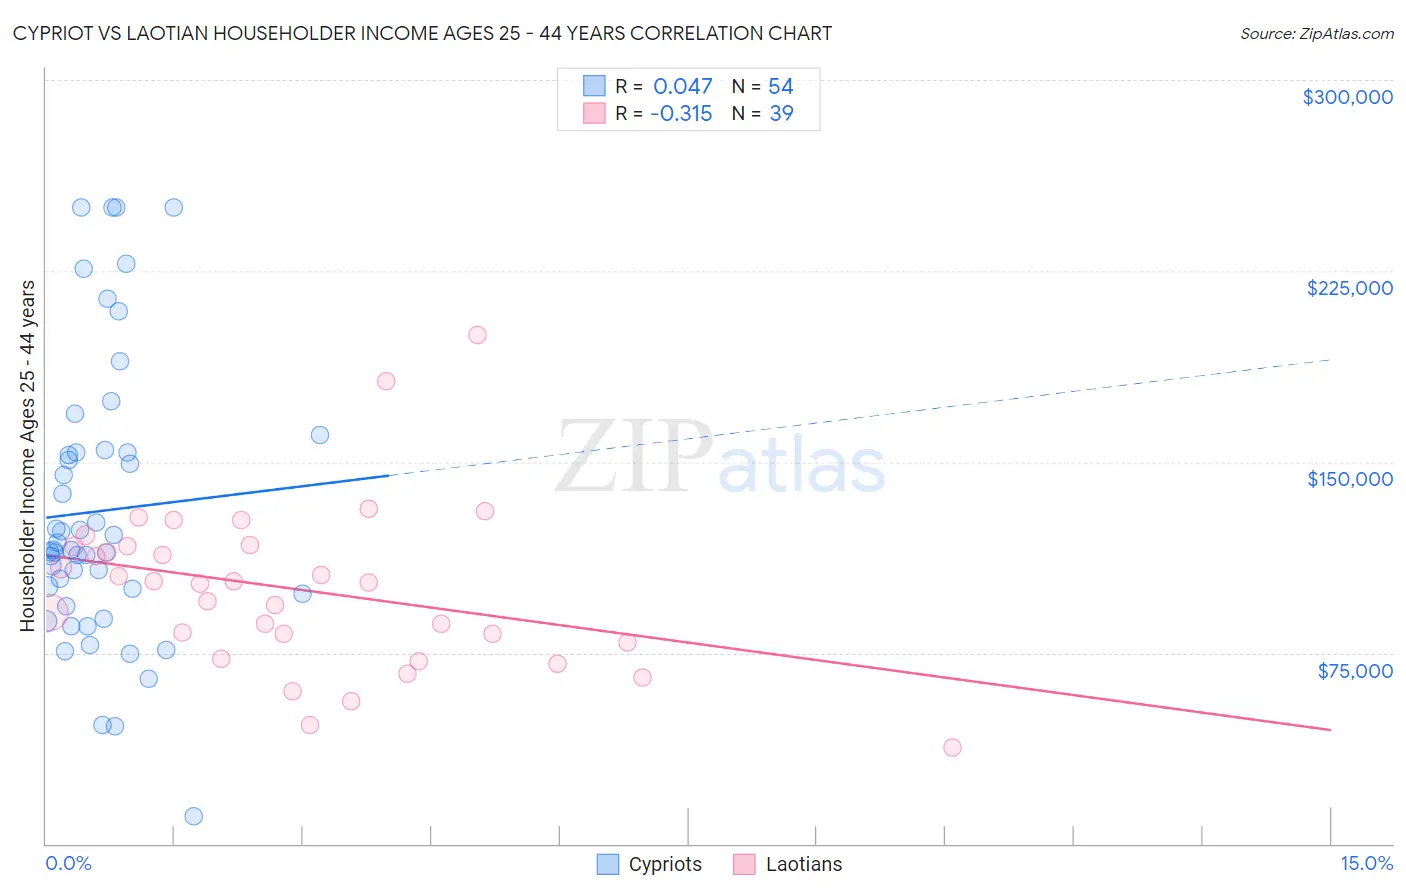 Cypriot vs Laotian Householder Income Ages 25 - 44 years